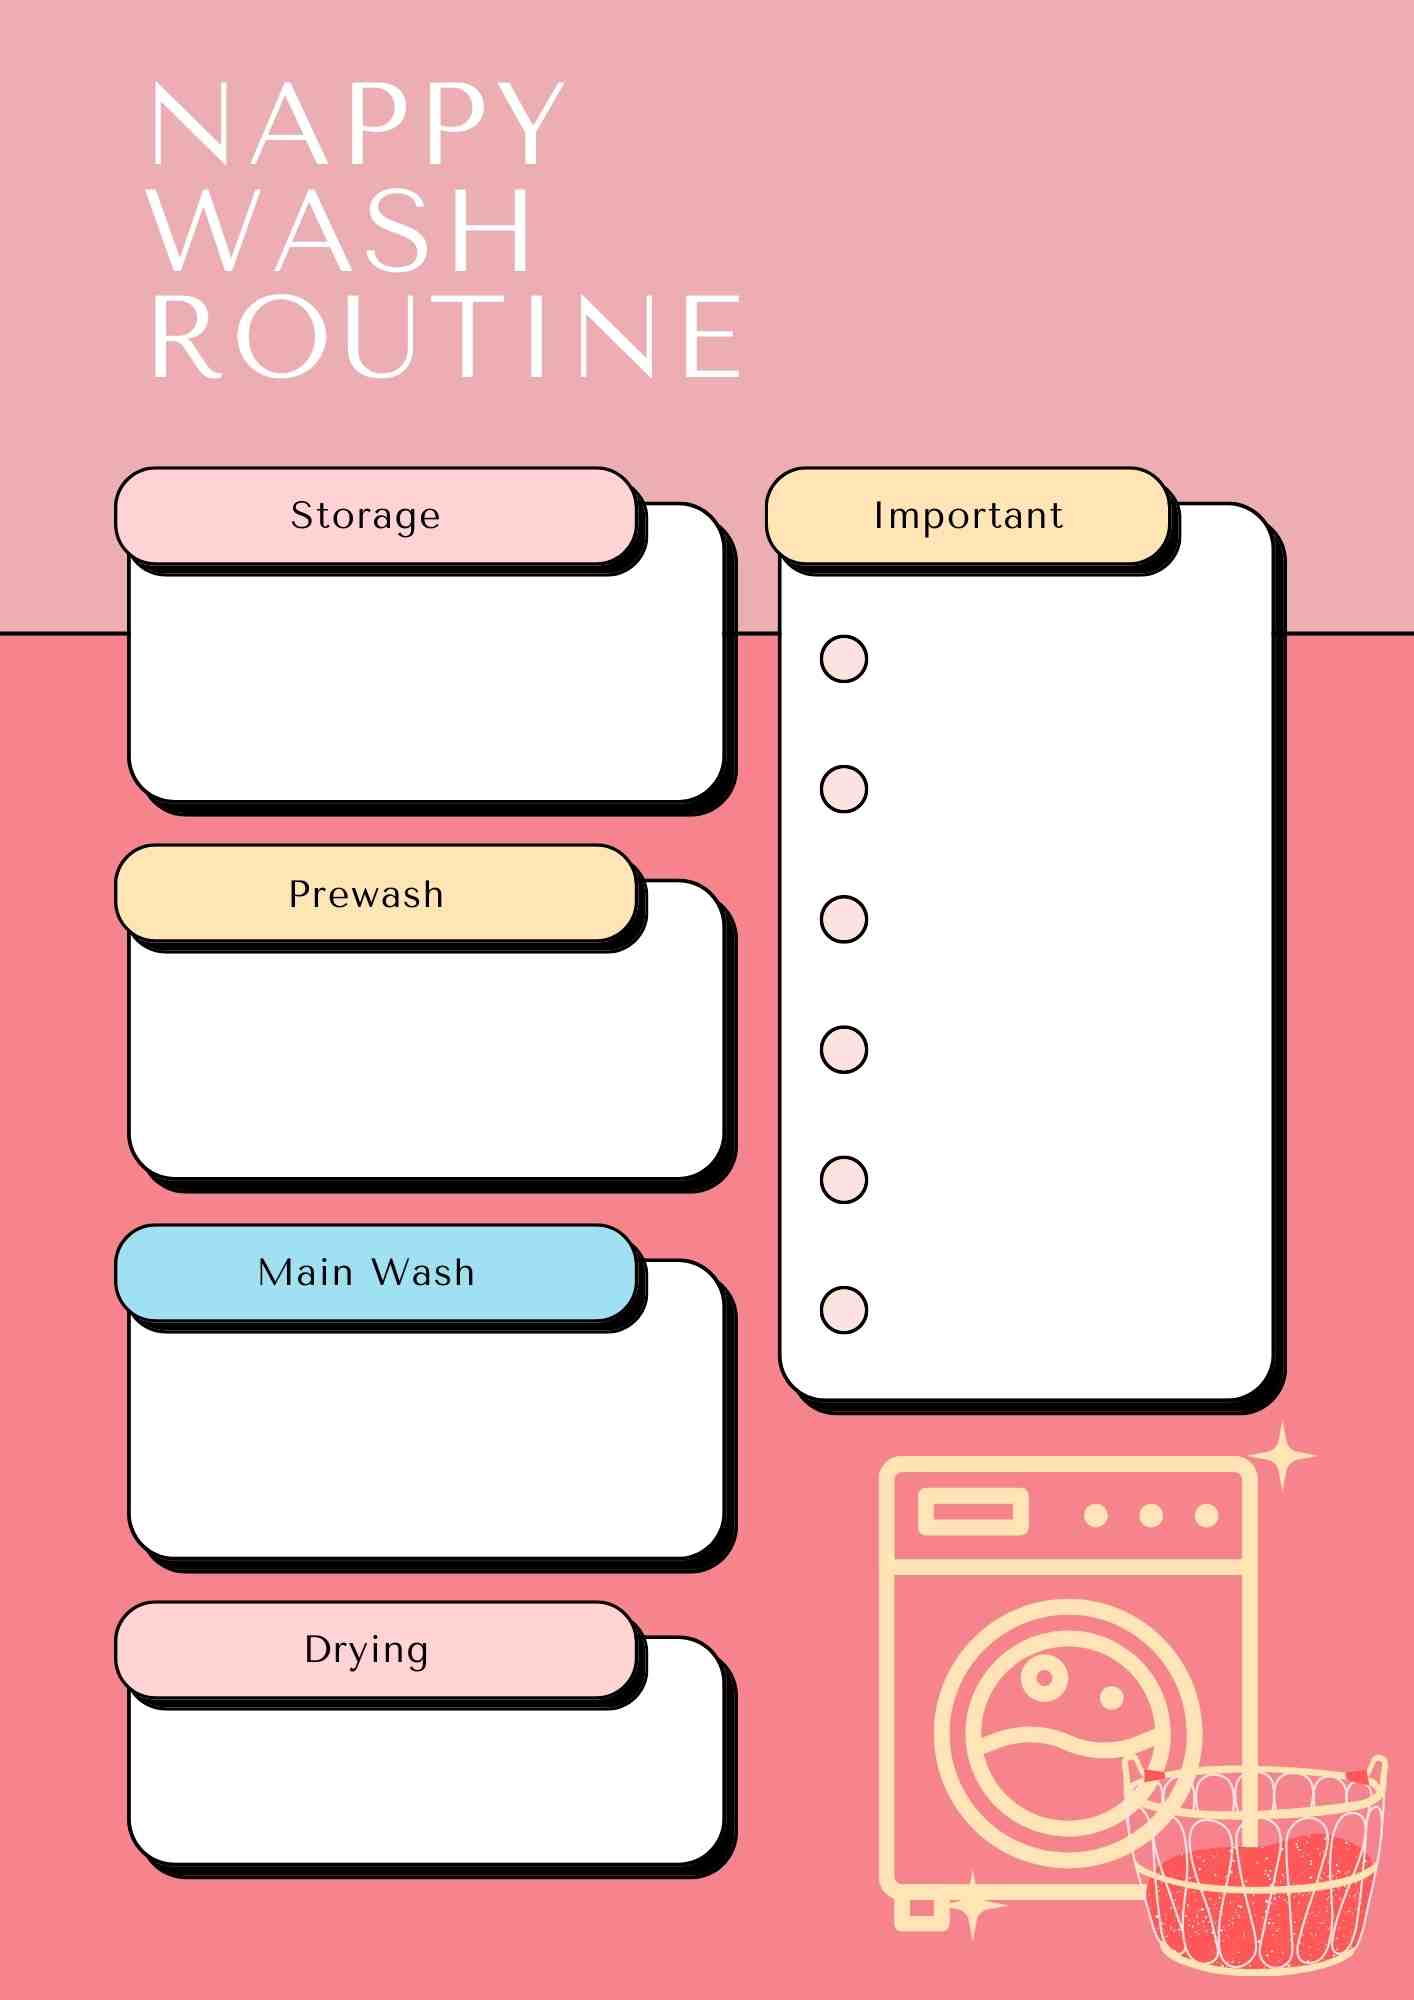 Nappy Wash Routine Template (Pink)